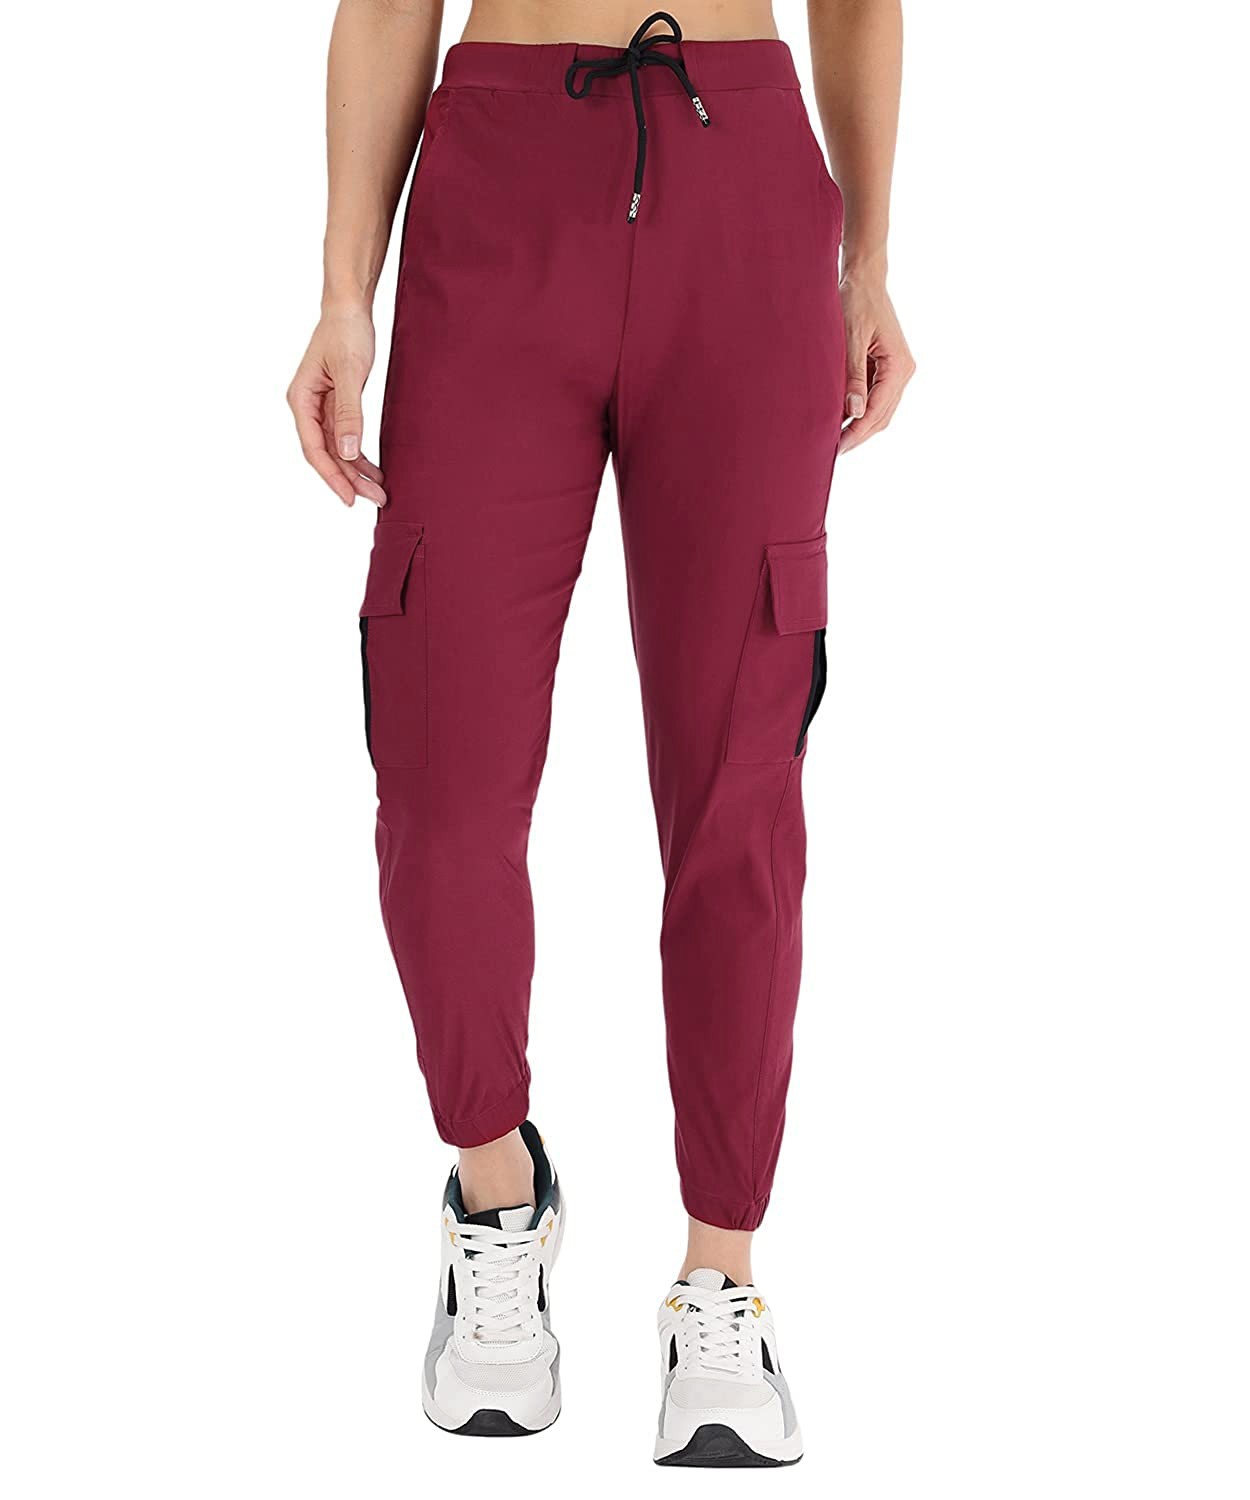 The model in the image is wearing Wine Double Pocket Corgo Pant from Alice Milan. Crafted with the finest materials and impeccable attention to detail, the Cargo Pant looks premium, trendy, luxurious and offers unparalleled comfort. It’s a perfect clothing option for loungewear, resort wear, party wear or for an airport look. The woman in the image looks happy, and confident with her style statement putting a happy smile on her face.